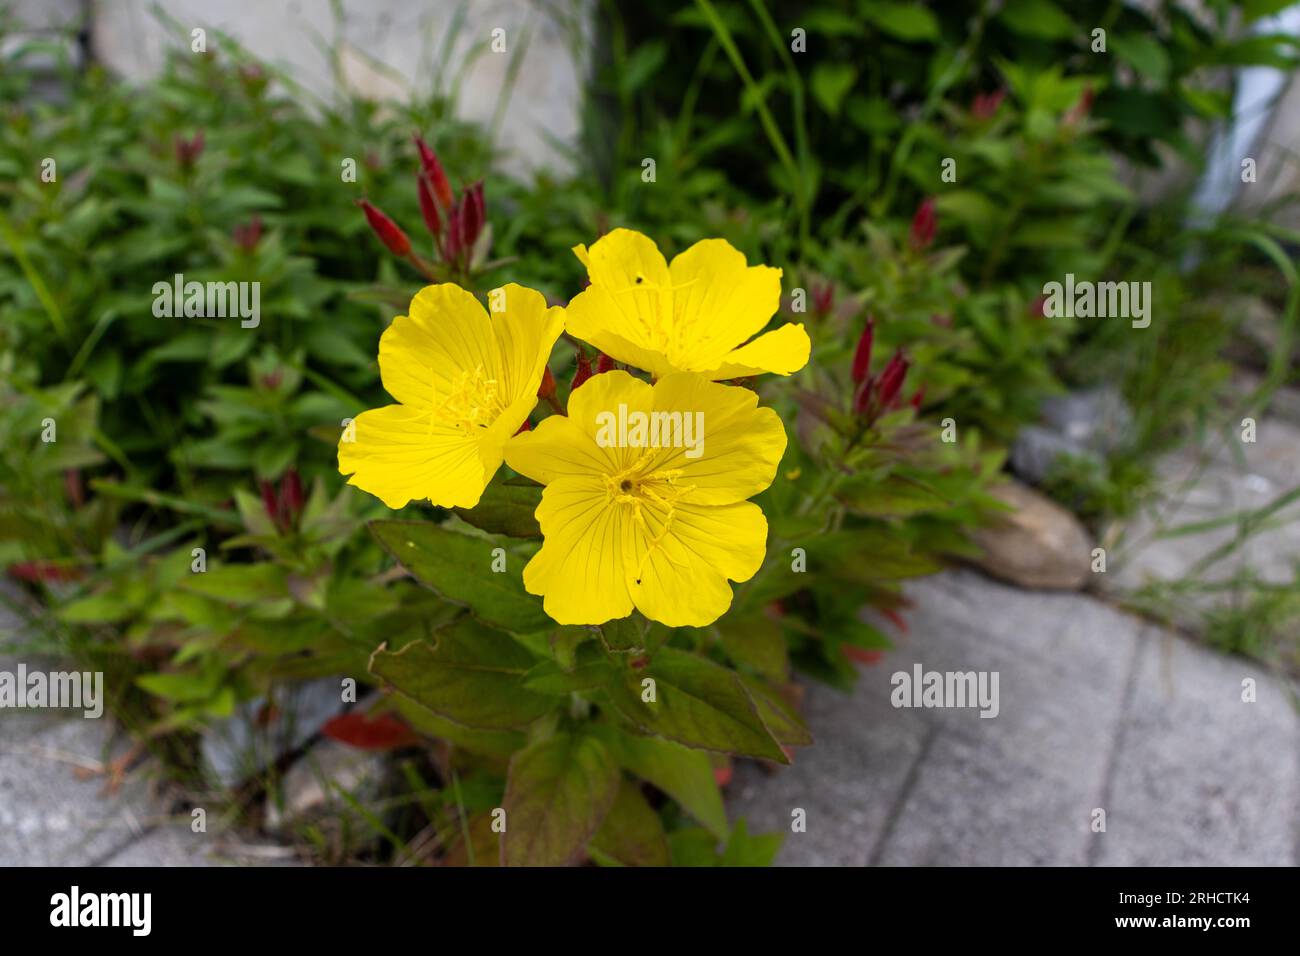 Yellow flower with four petals - in focus and center of image - darker yellow center and overlapping petals - green and red out of focus background - Stock Photo